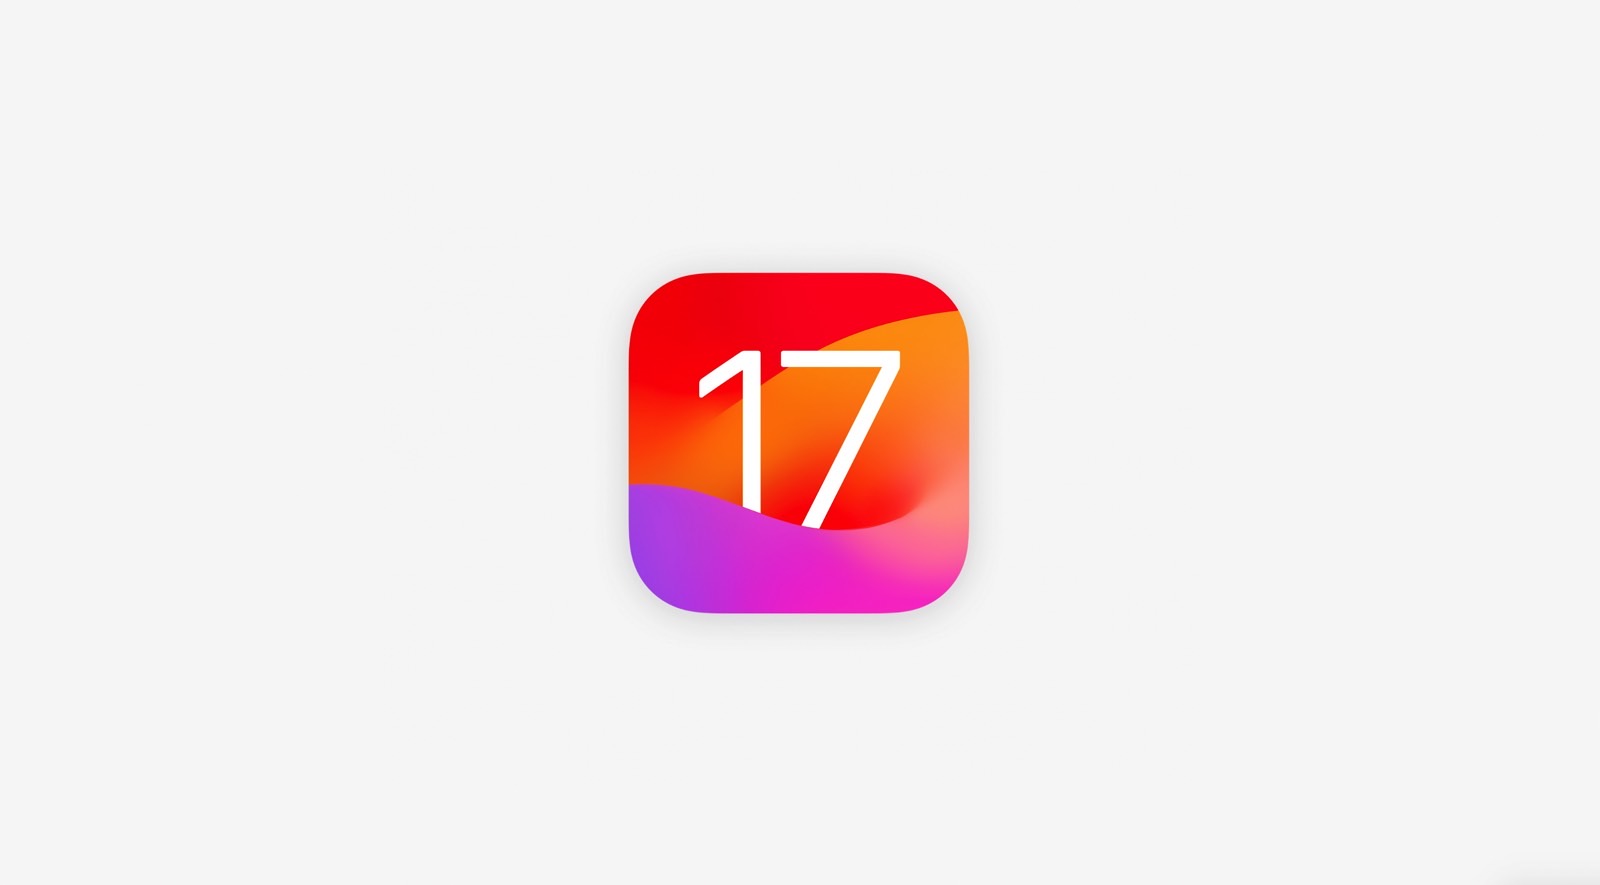 iOS 17: Release date, download, beta, supported devices, and more